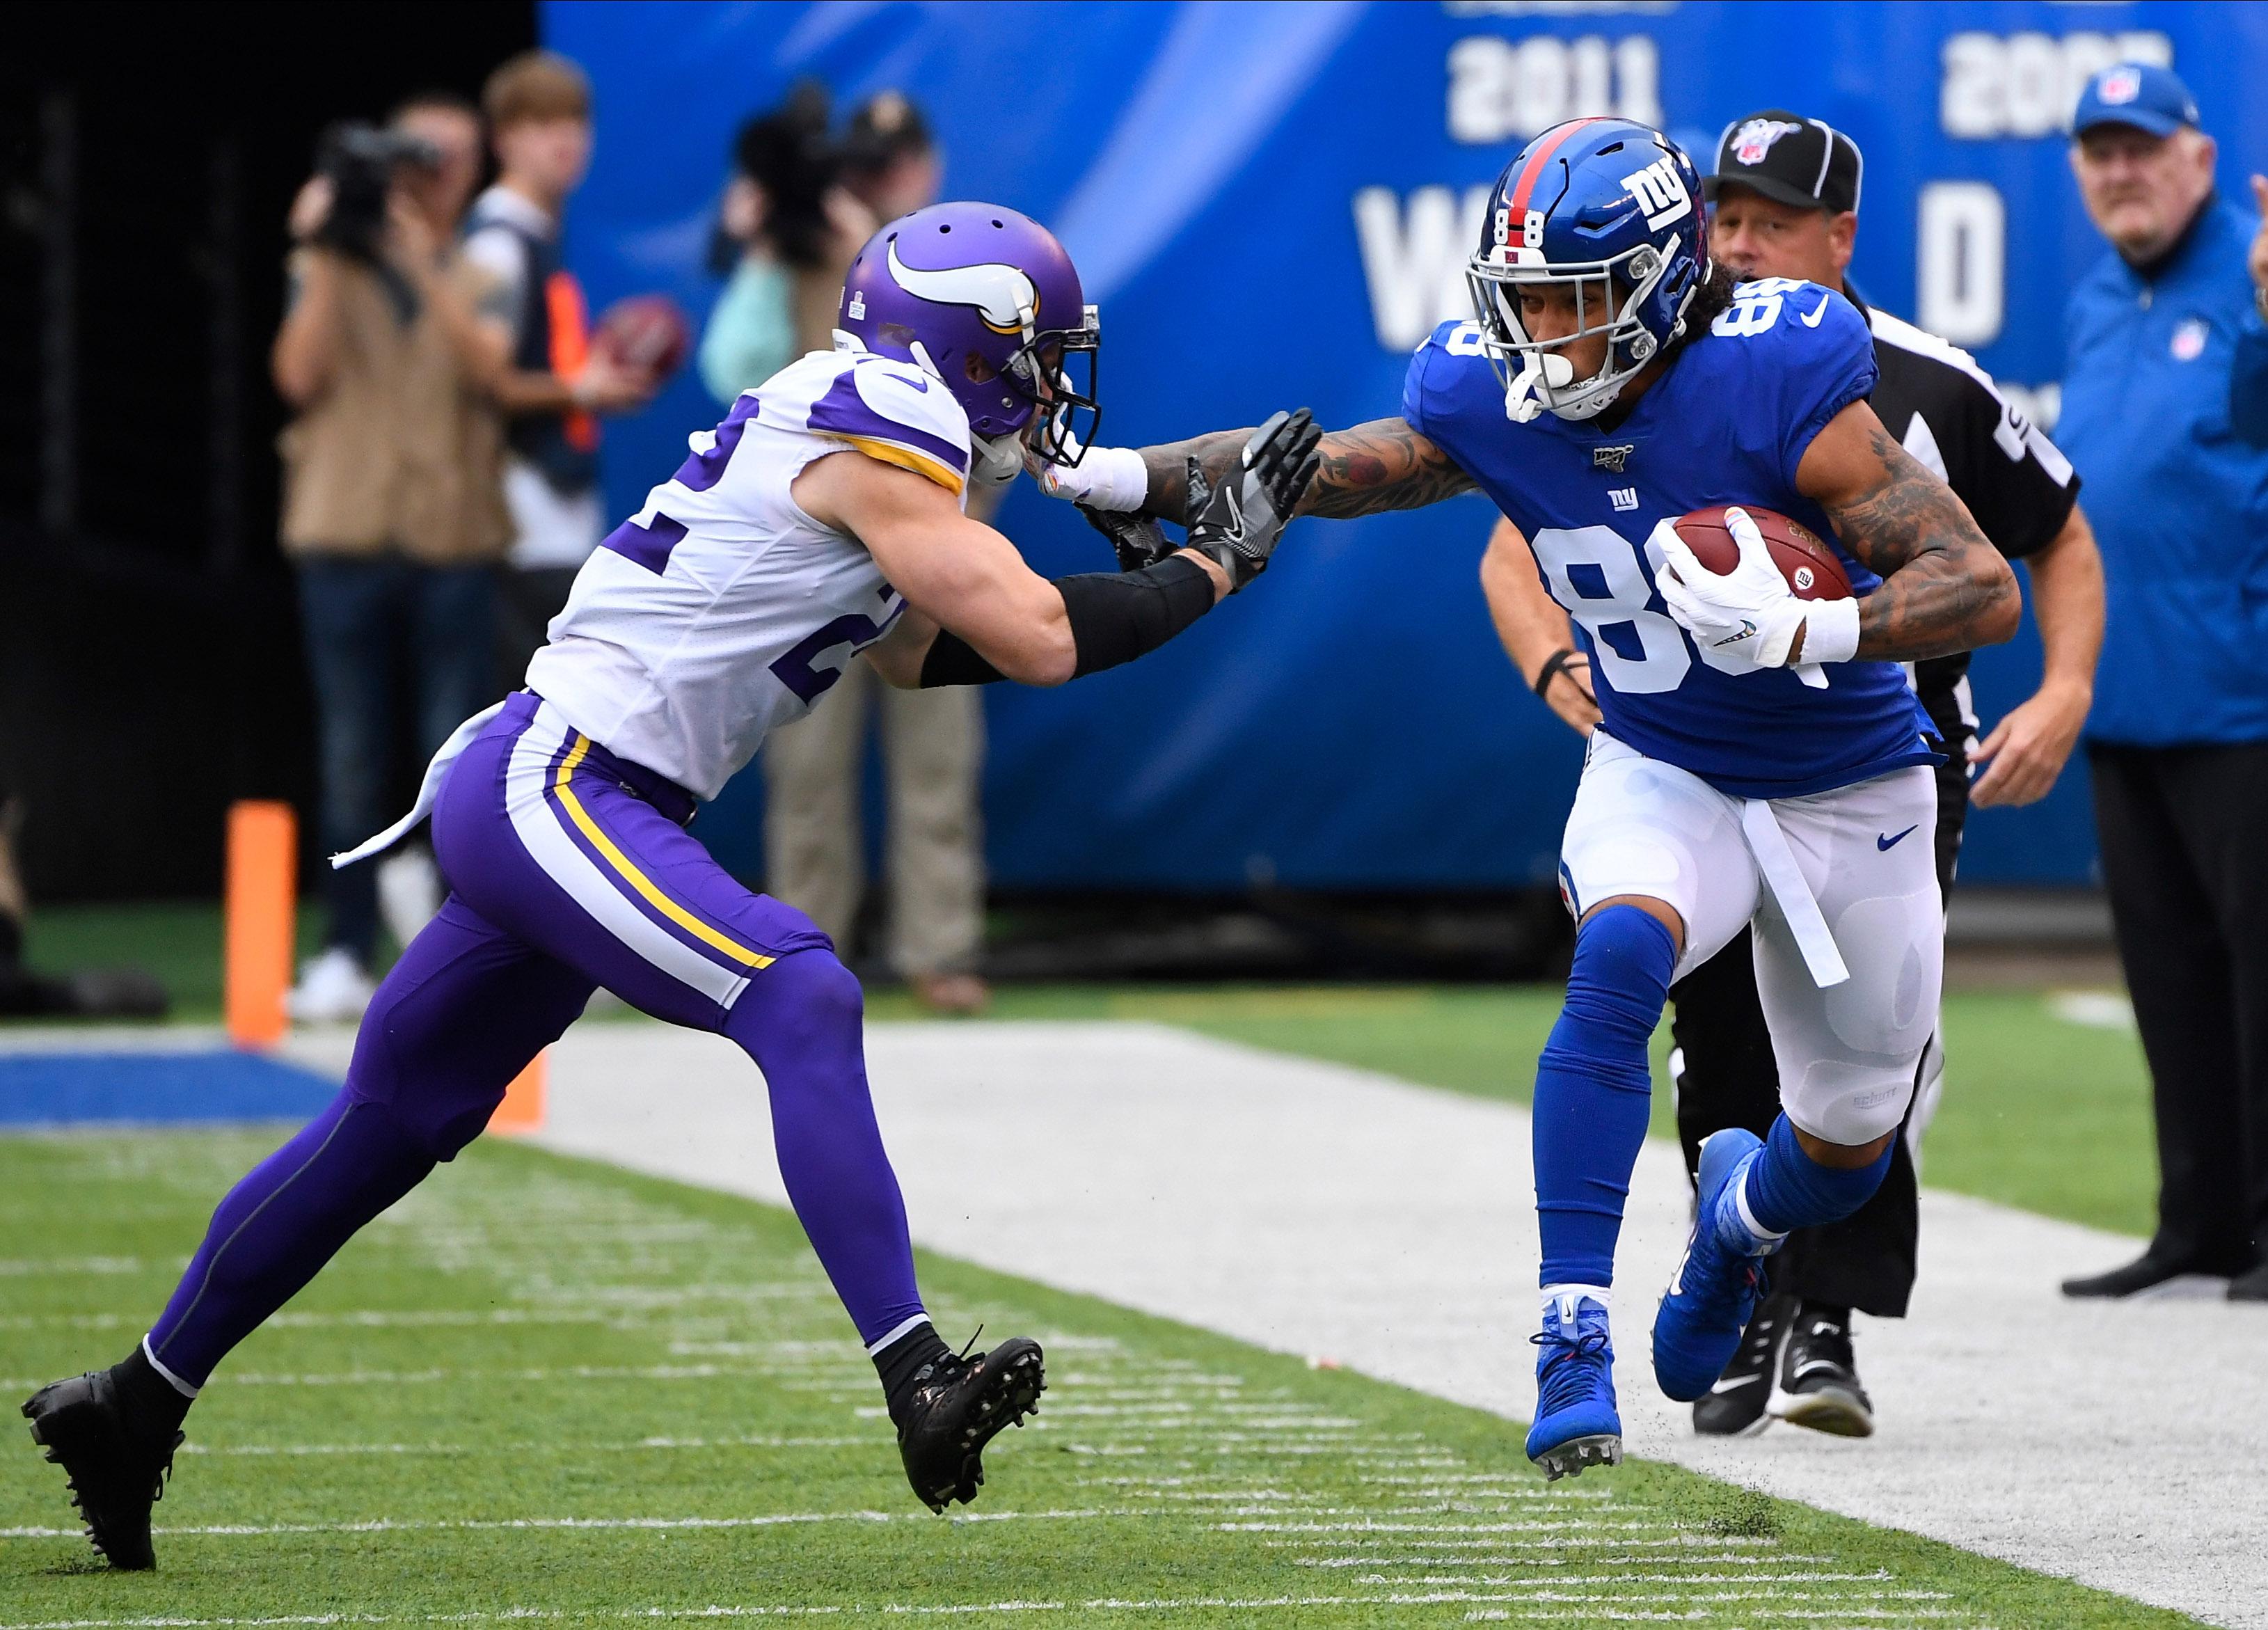 Oct 6, 2019; East Rutherford, NJ, USA; New York Giants tight end Evan Engram (88) gets a first down in the first quarter as Minnesota Vikings free safety Harrison Smith (22) defends at MetLife Stadium. / Robert Deutsch-USA TODAY Sports